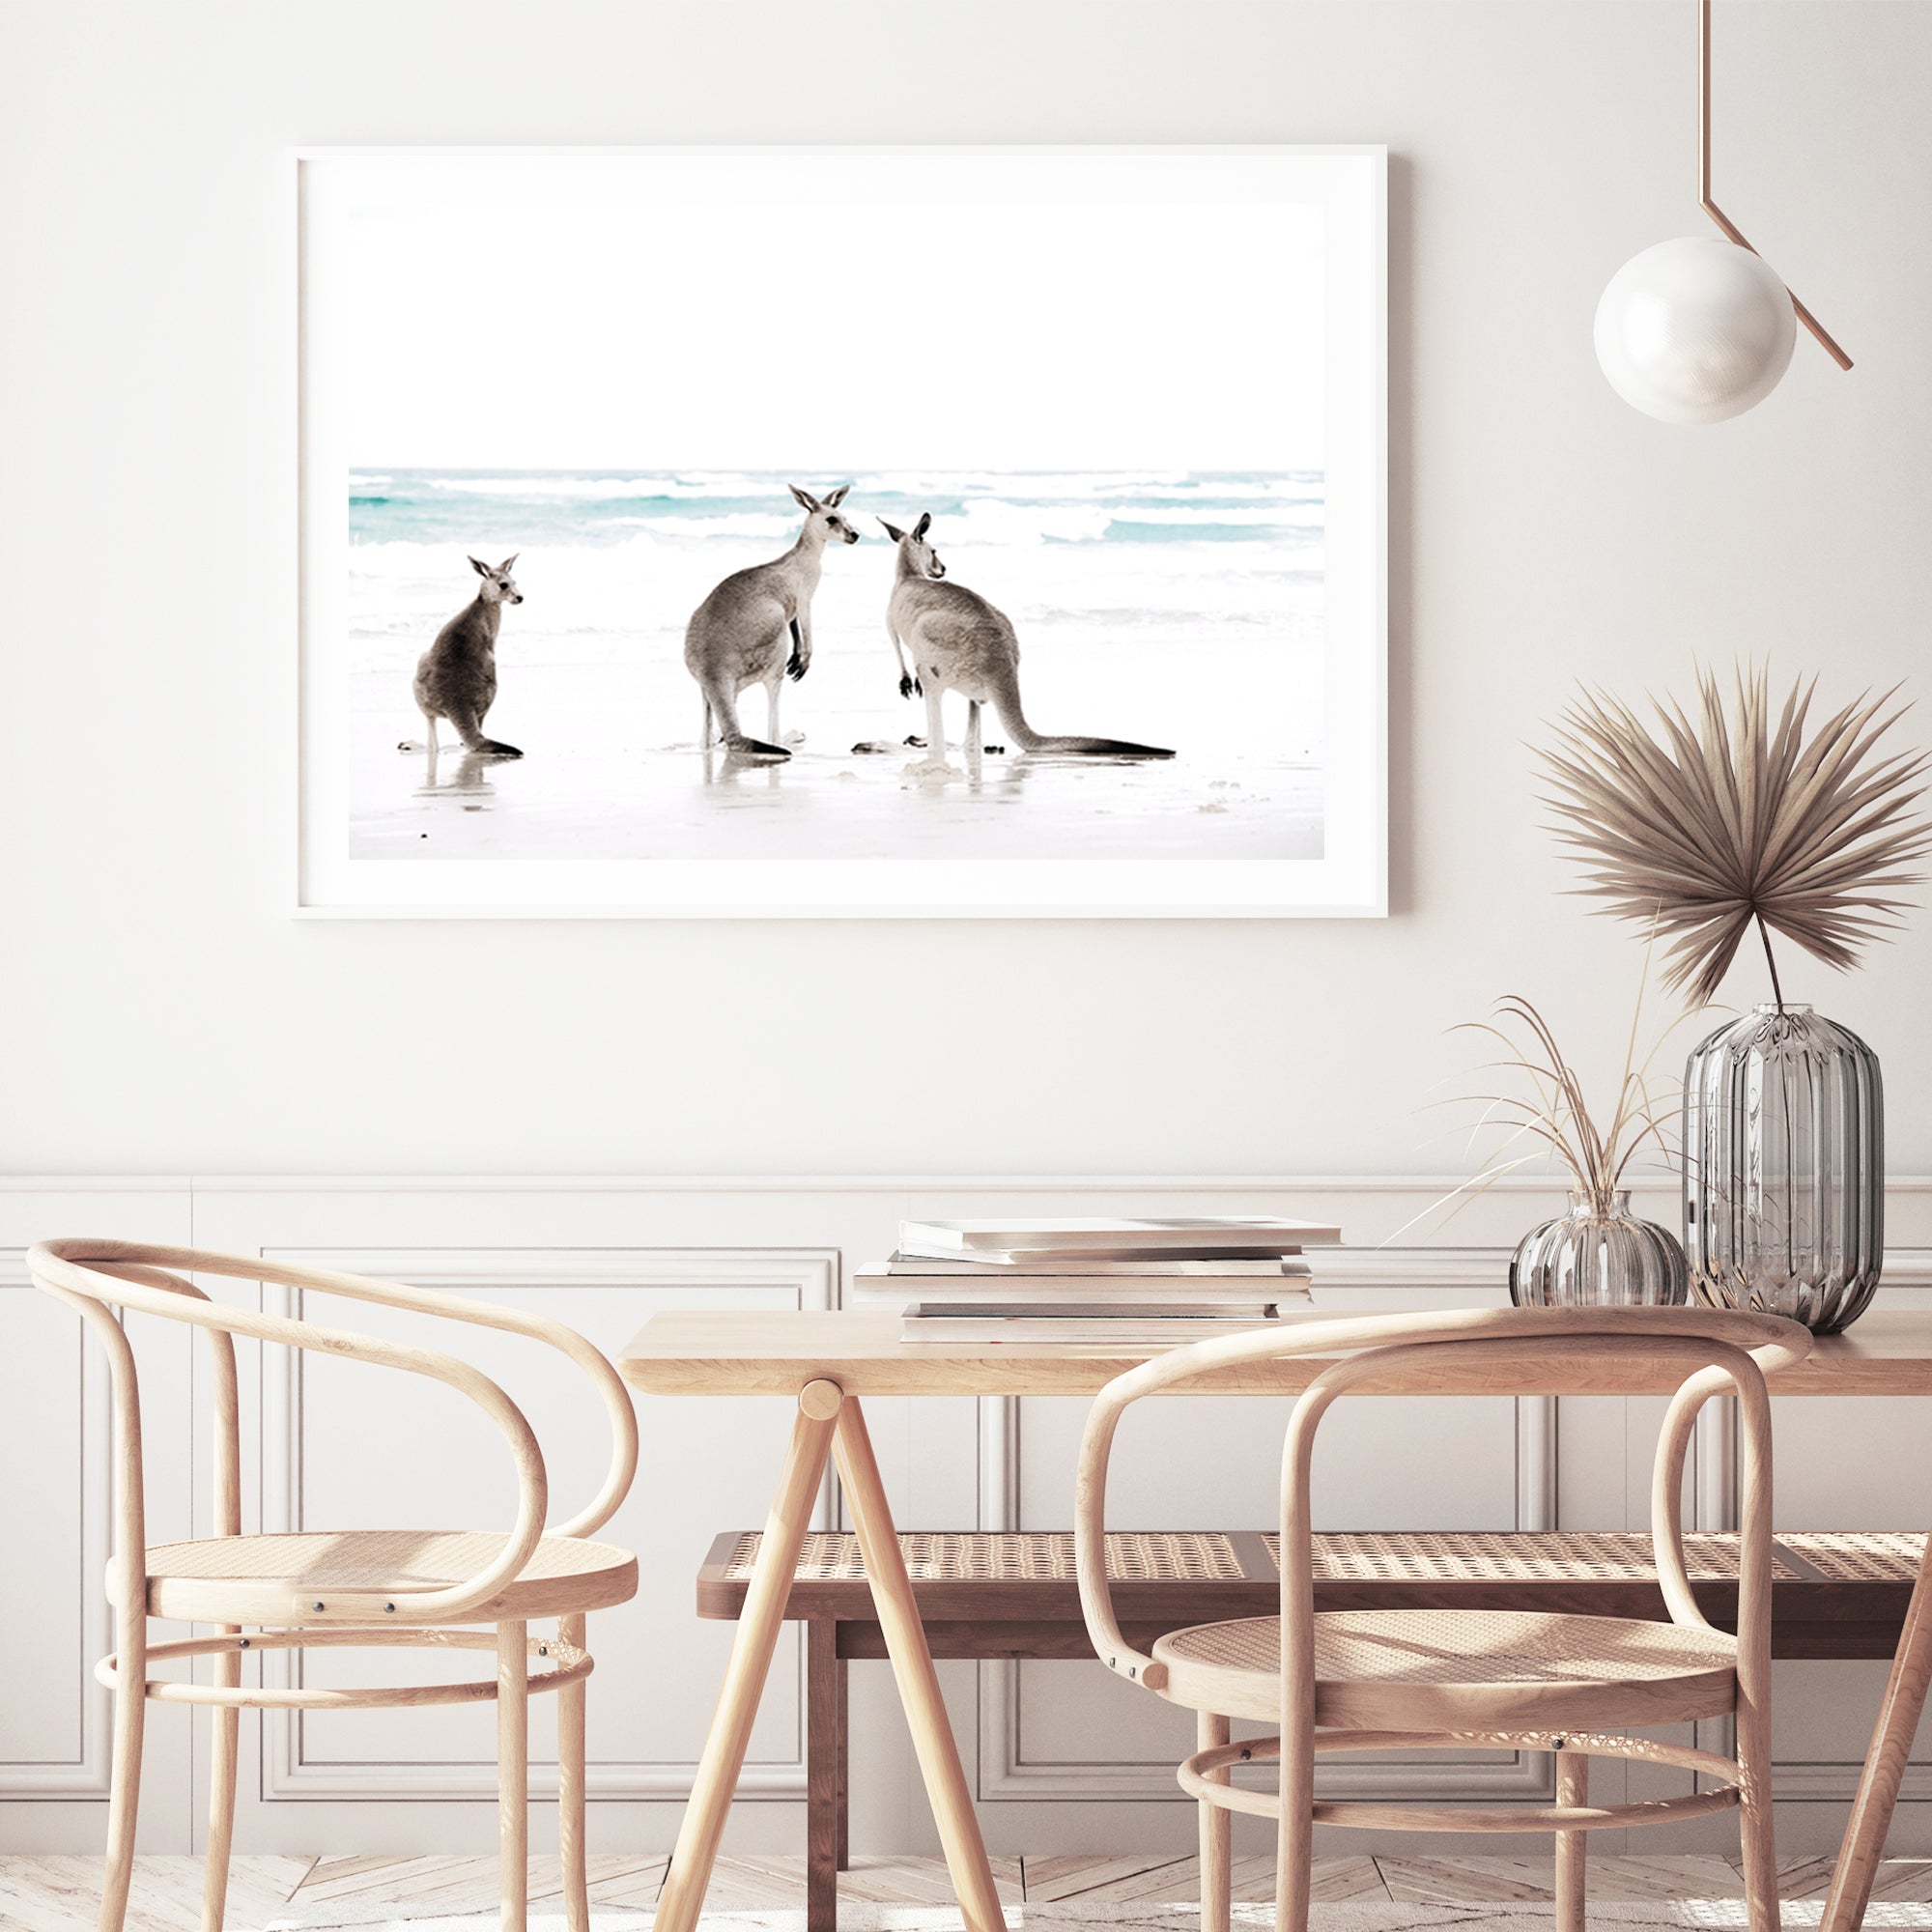 Stretched canvas artwork featuring three kangaroos enjoying some time on the beach, available framed or unframed. 